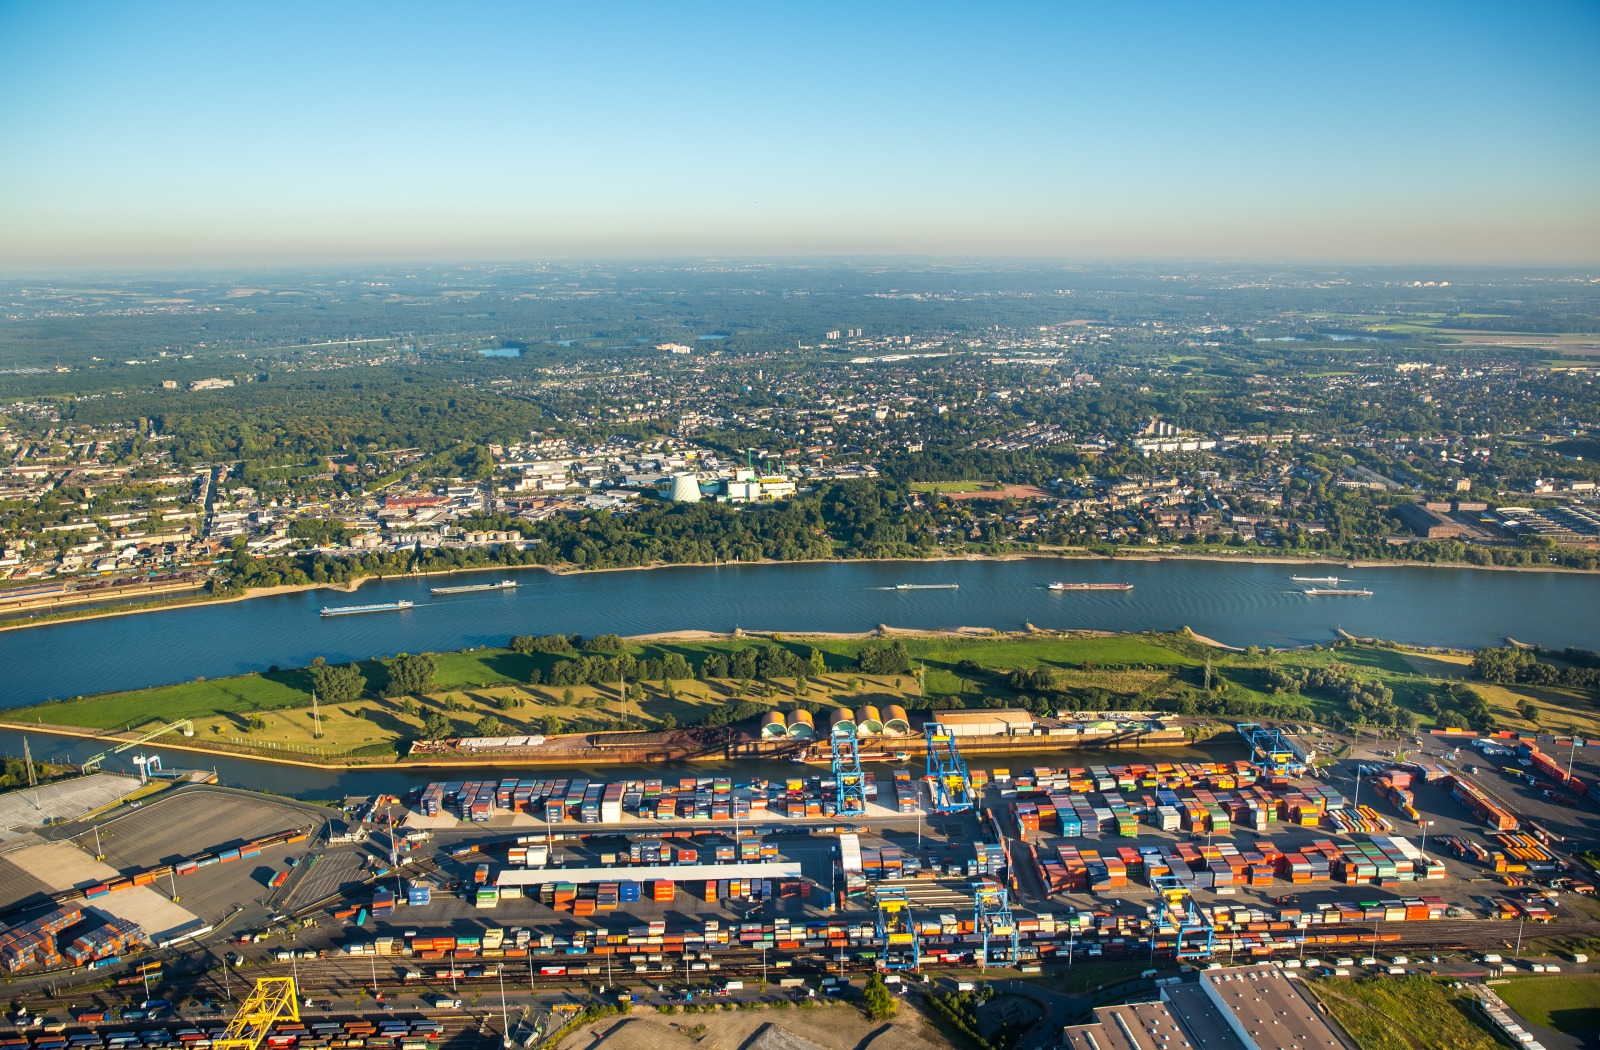 More than 2,000 freight trains between Duisburg and Chongqing